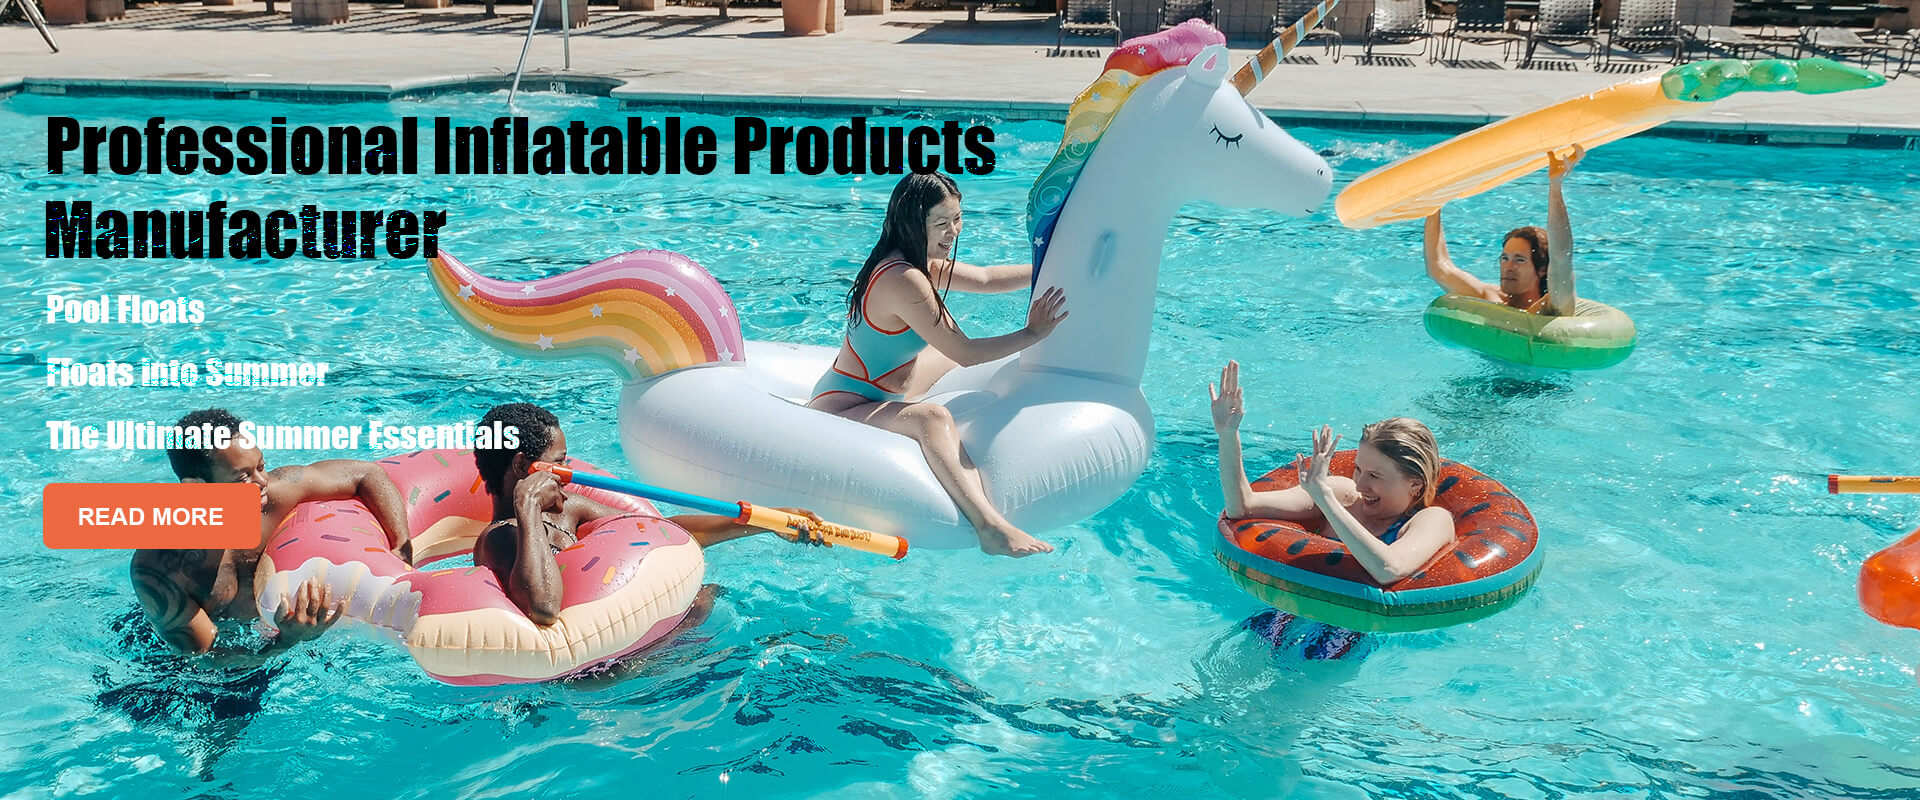 pool floats Products